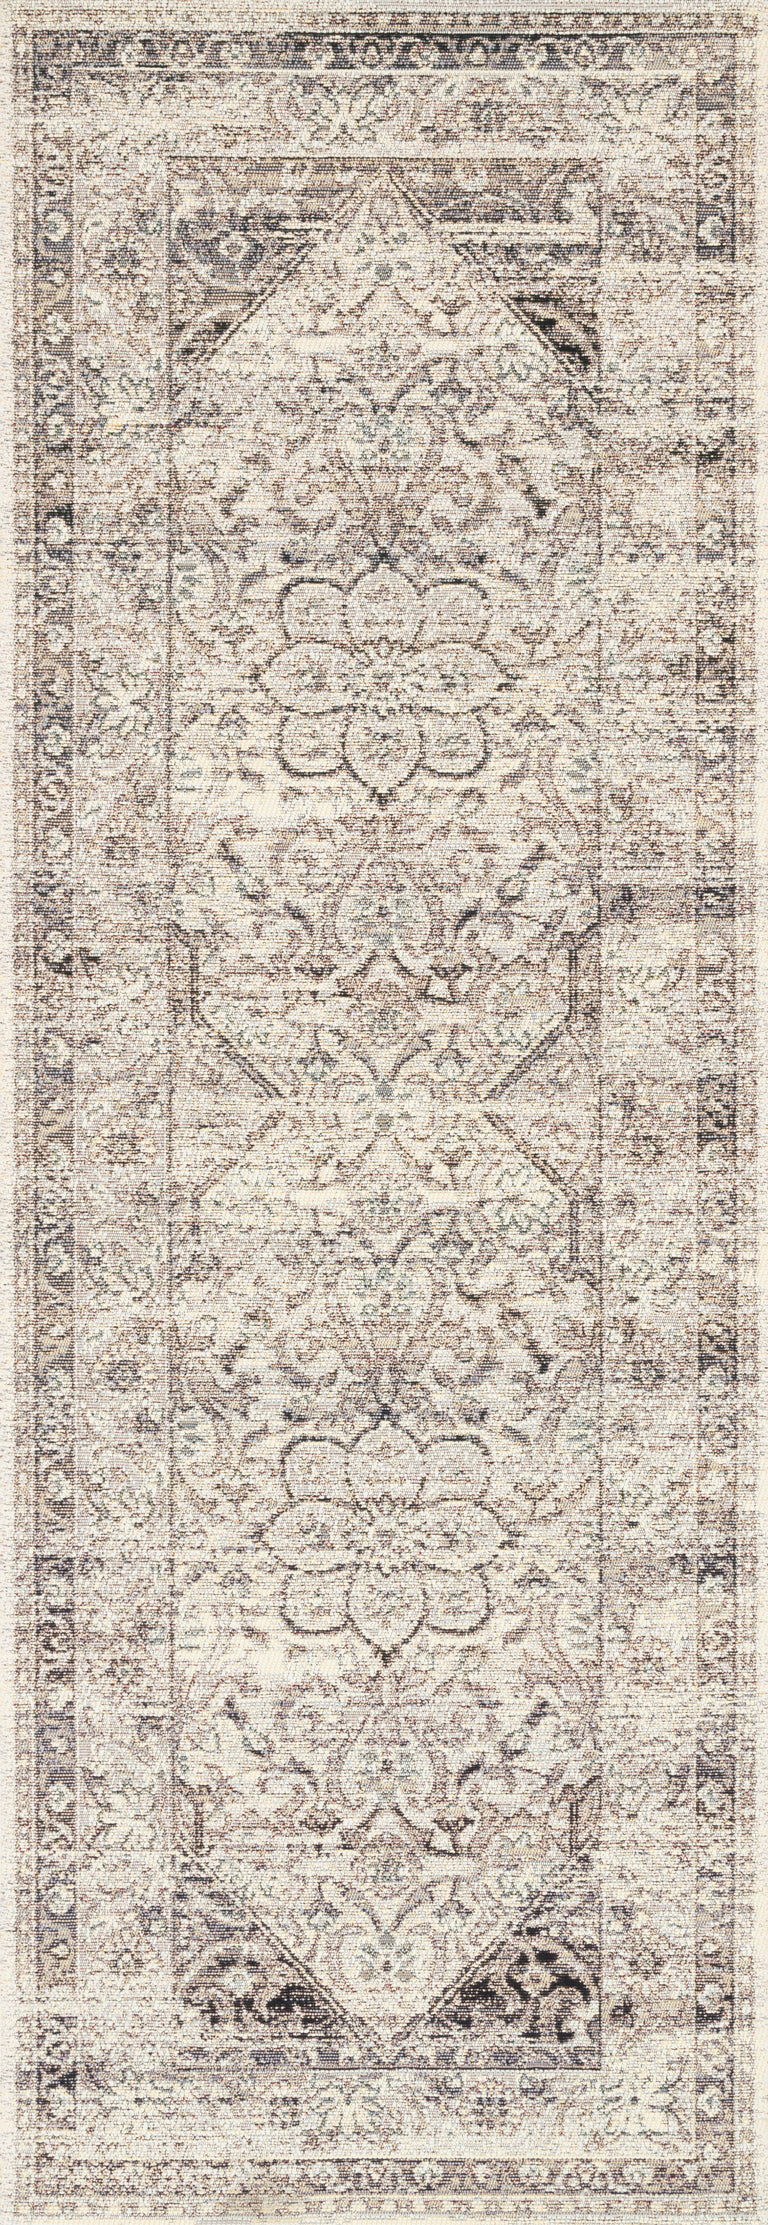 Loloi Rugs Mika Collection Rug in Stone, Ivory - 10'6" x 13'9"